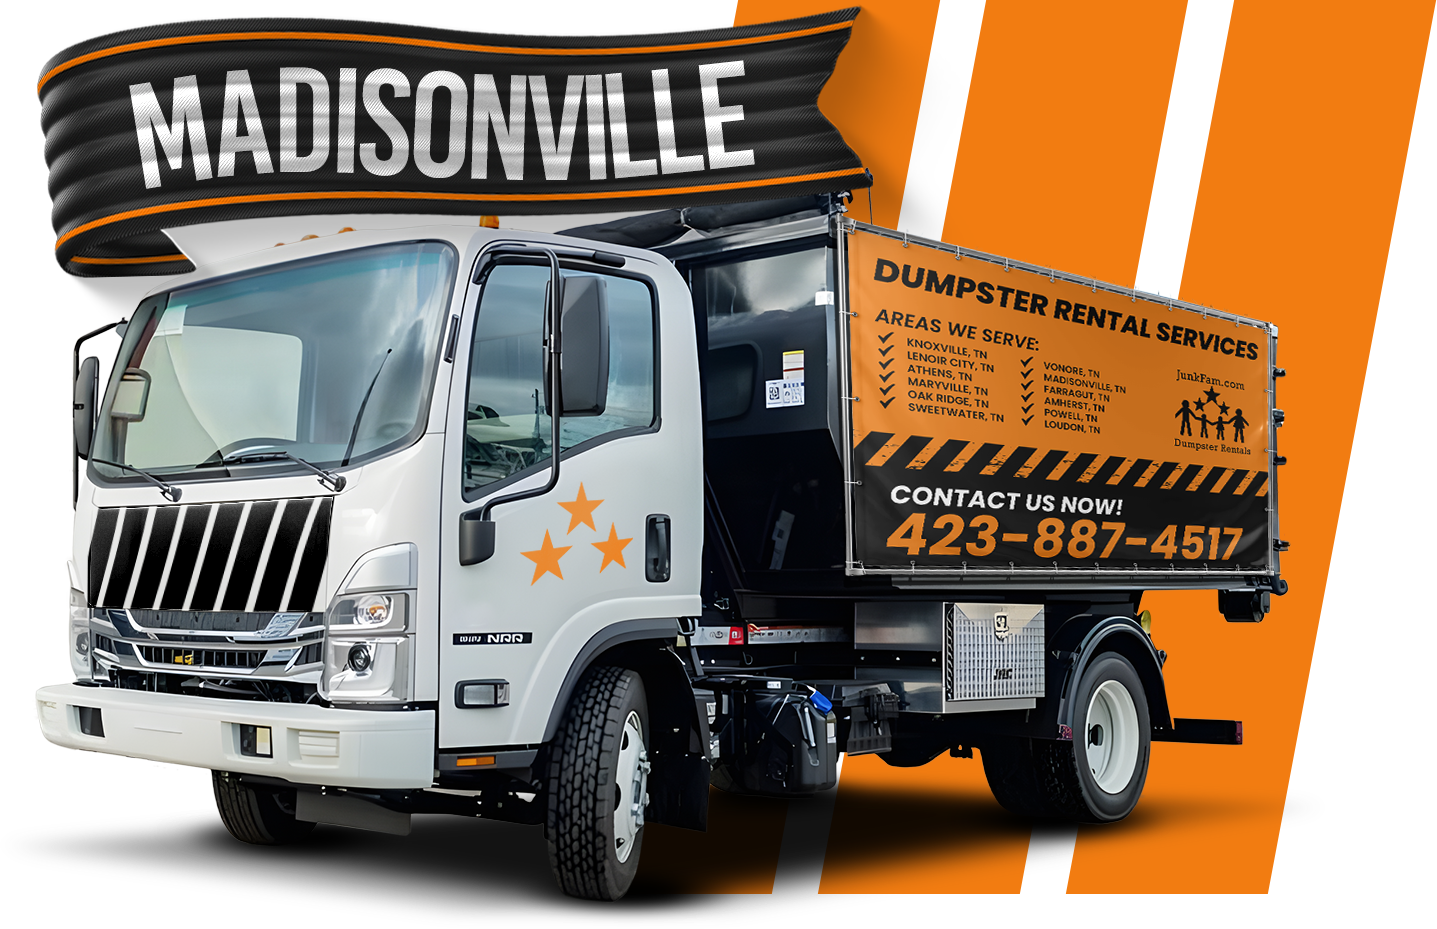 A dump truck is parked in front of a sign that says Madisonville.